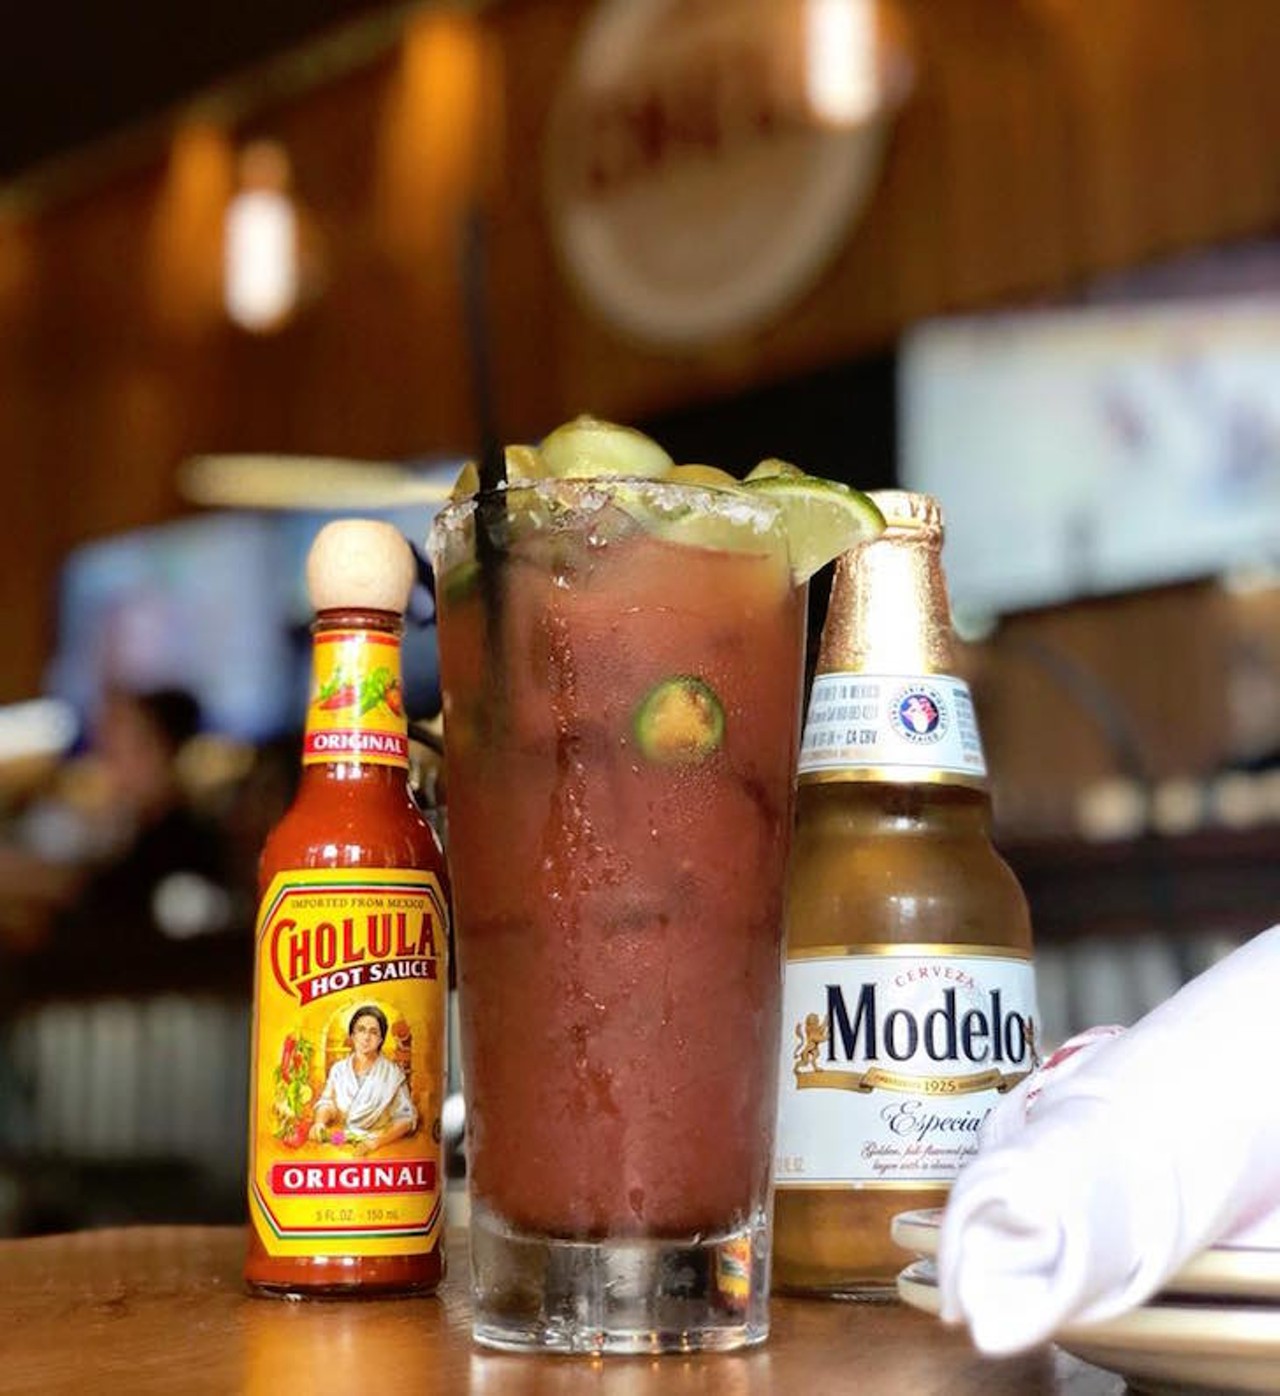 Chela Tequila and Tacos
183 S. Orange Ave., 407-985-5272
Customization is without limits when you order a Bloody Mary here. Grab a plain Bloody Mary for $5-$8 and make your way to the garnish station, where you can add pickles, bacon and all sort of savory goodies to this morning time cocktail.
Photo via Chela Tequila and Taco Kitchen/Facebook